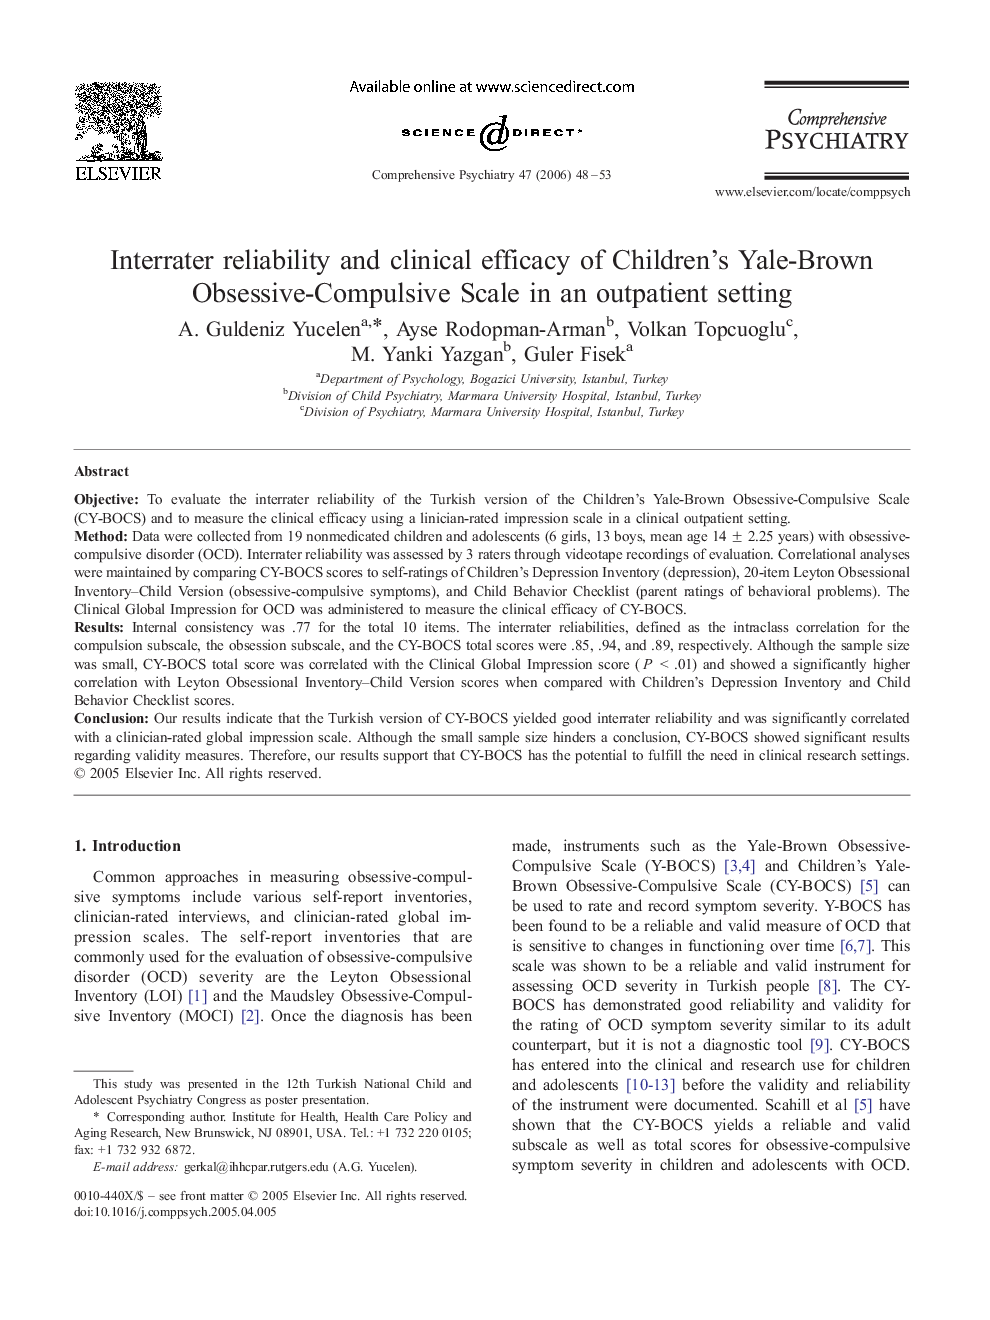 Interrater reliability and clinical efficacy of Children's Yale-Brown Obsessive-Compulsive Scale in an outpatient setting